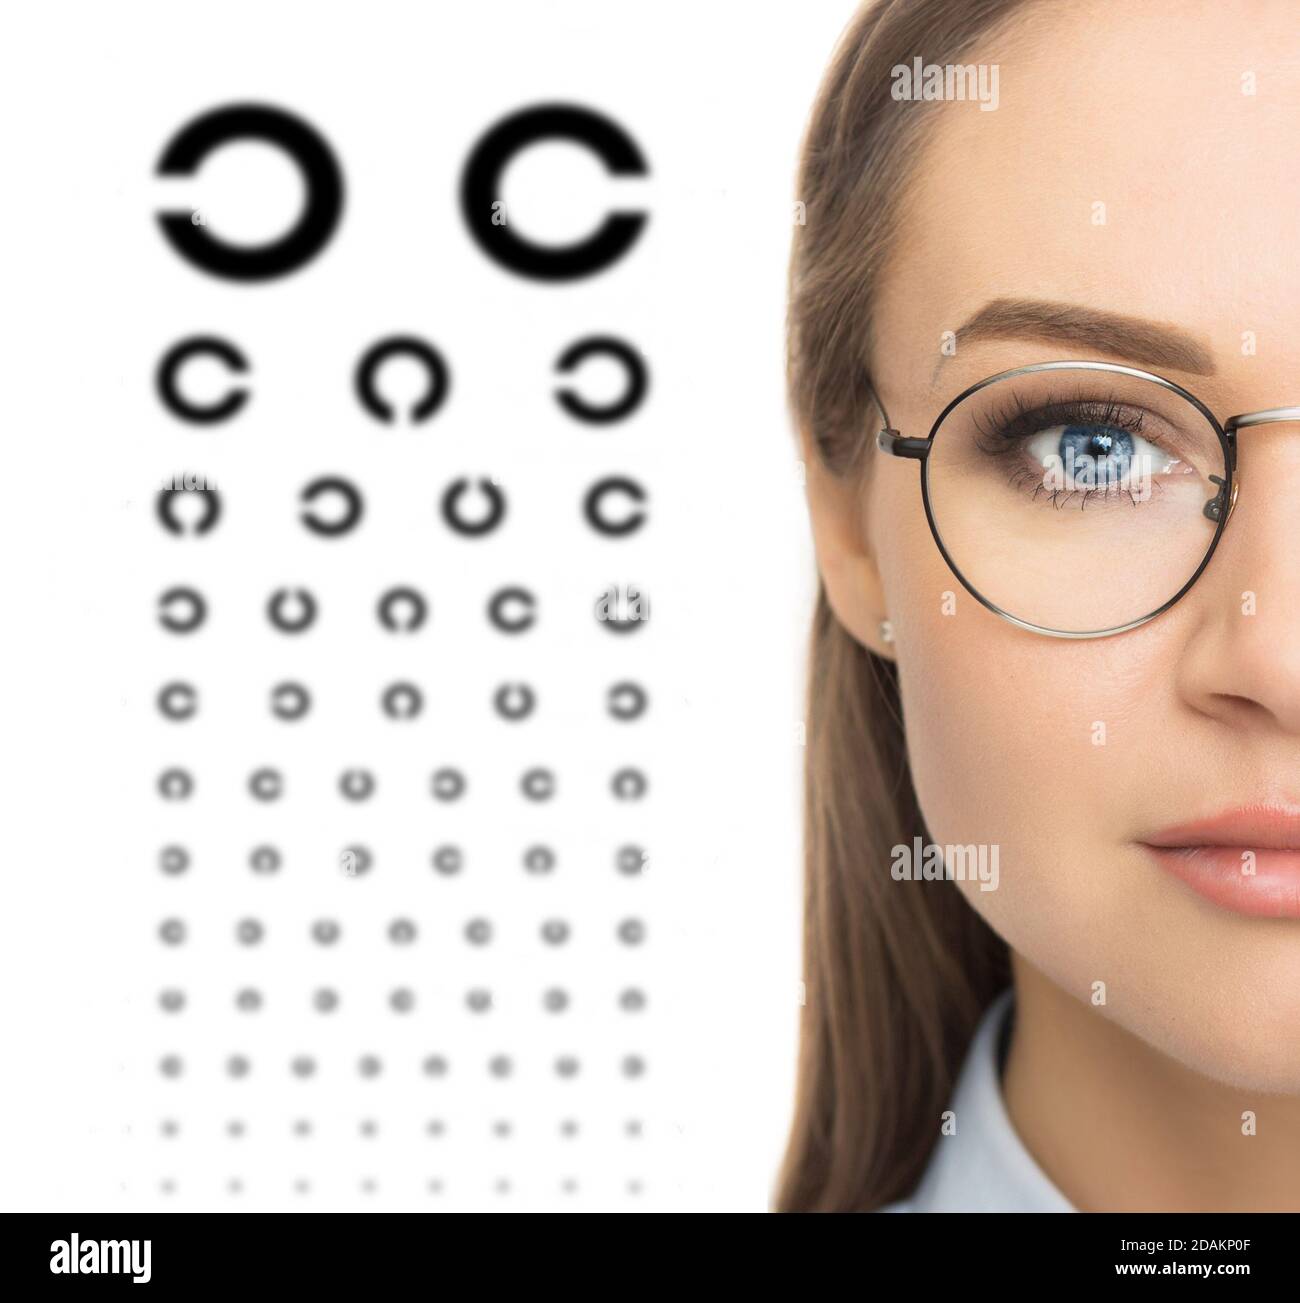 Medicine and vision concept - woman's eyes and eye chart. Stock Photo